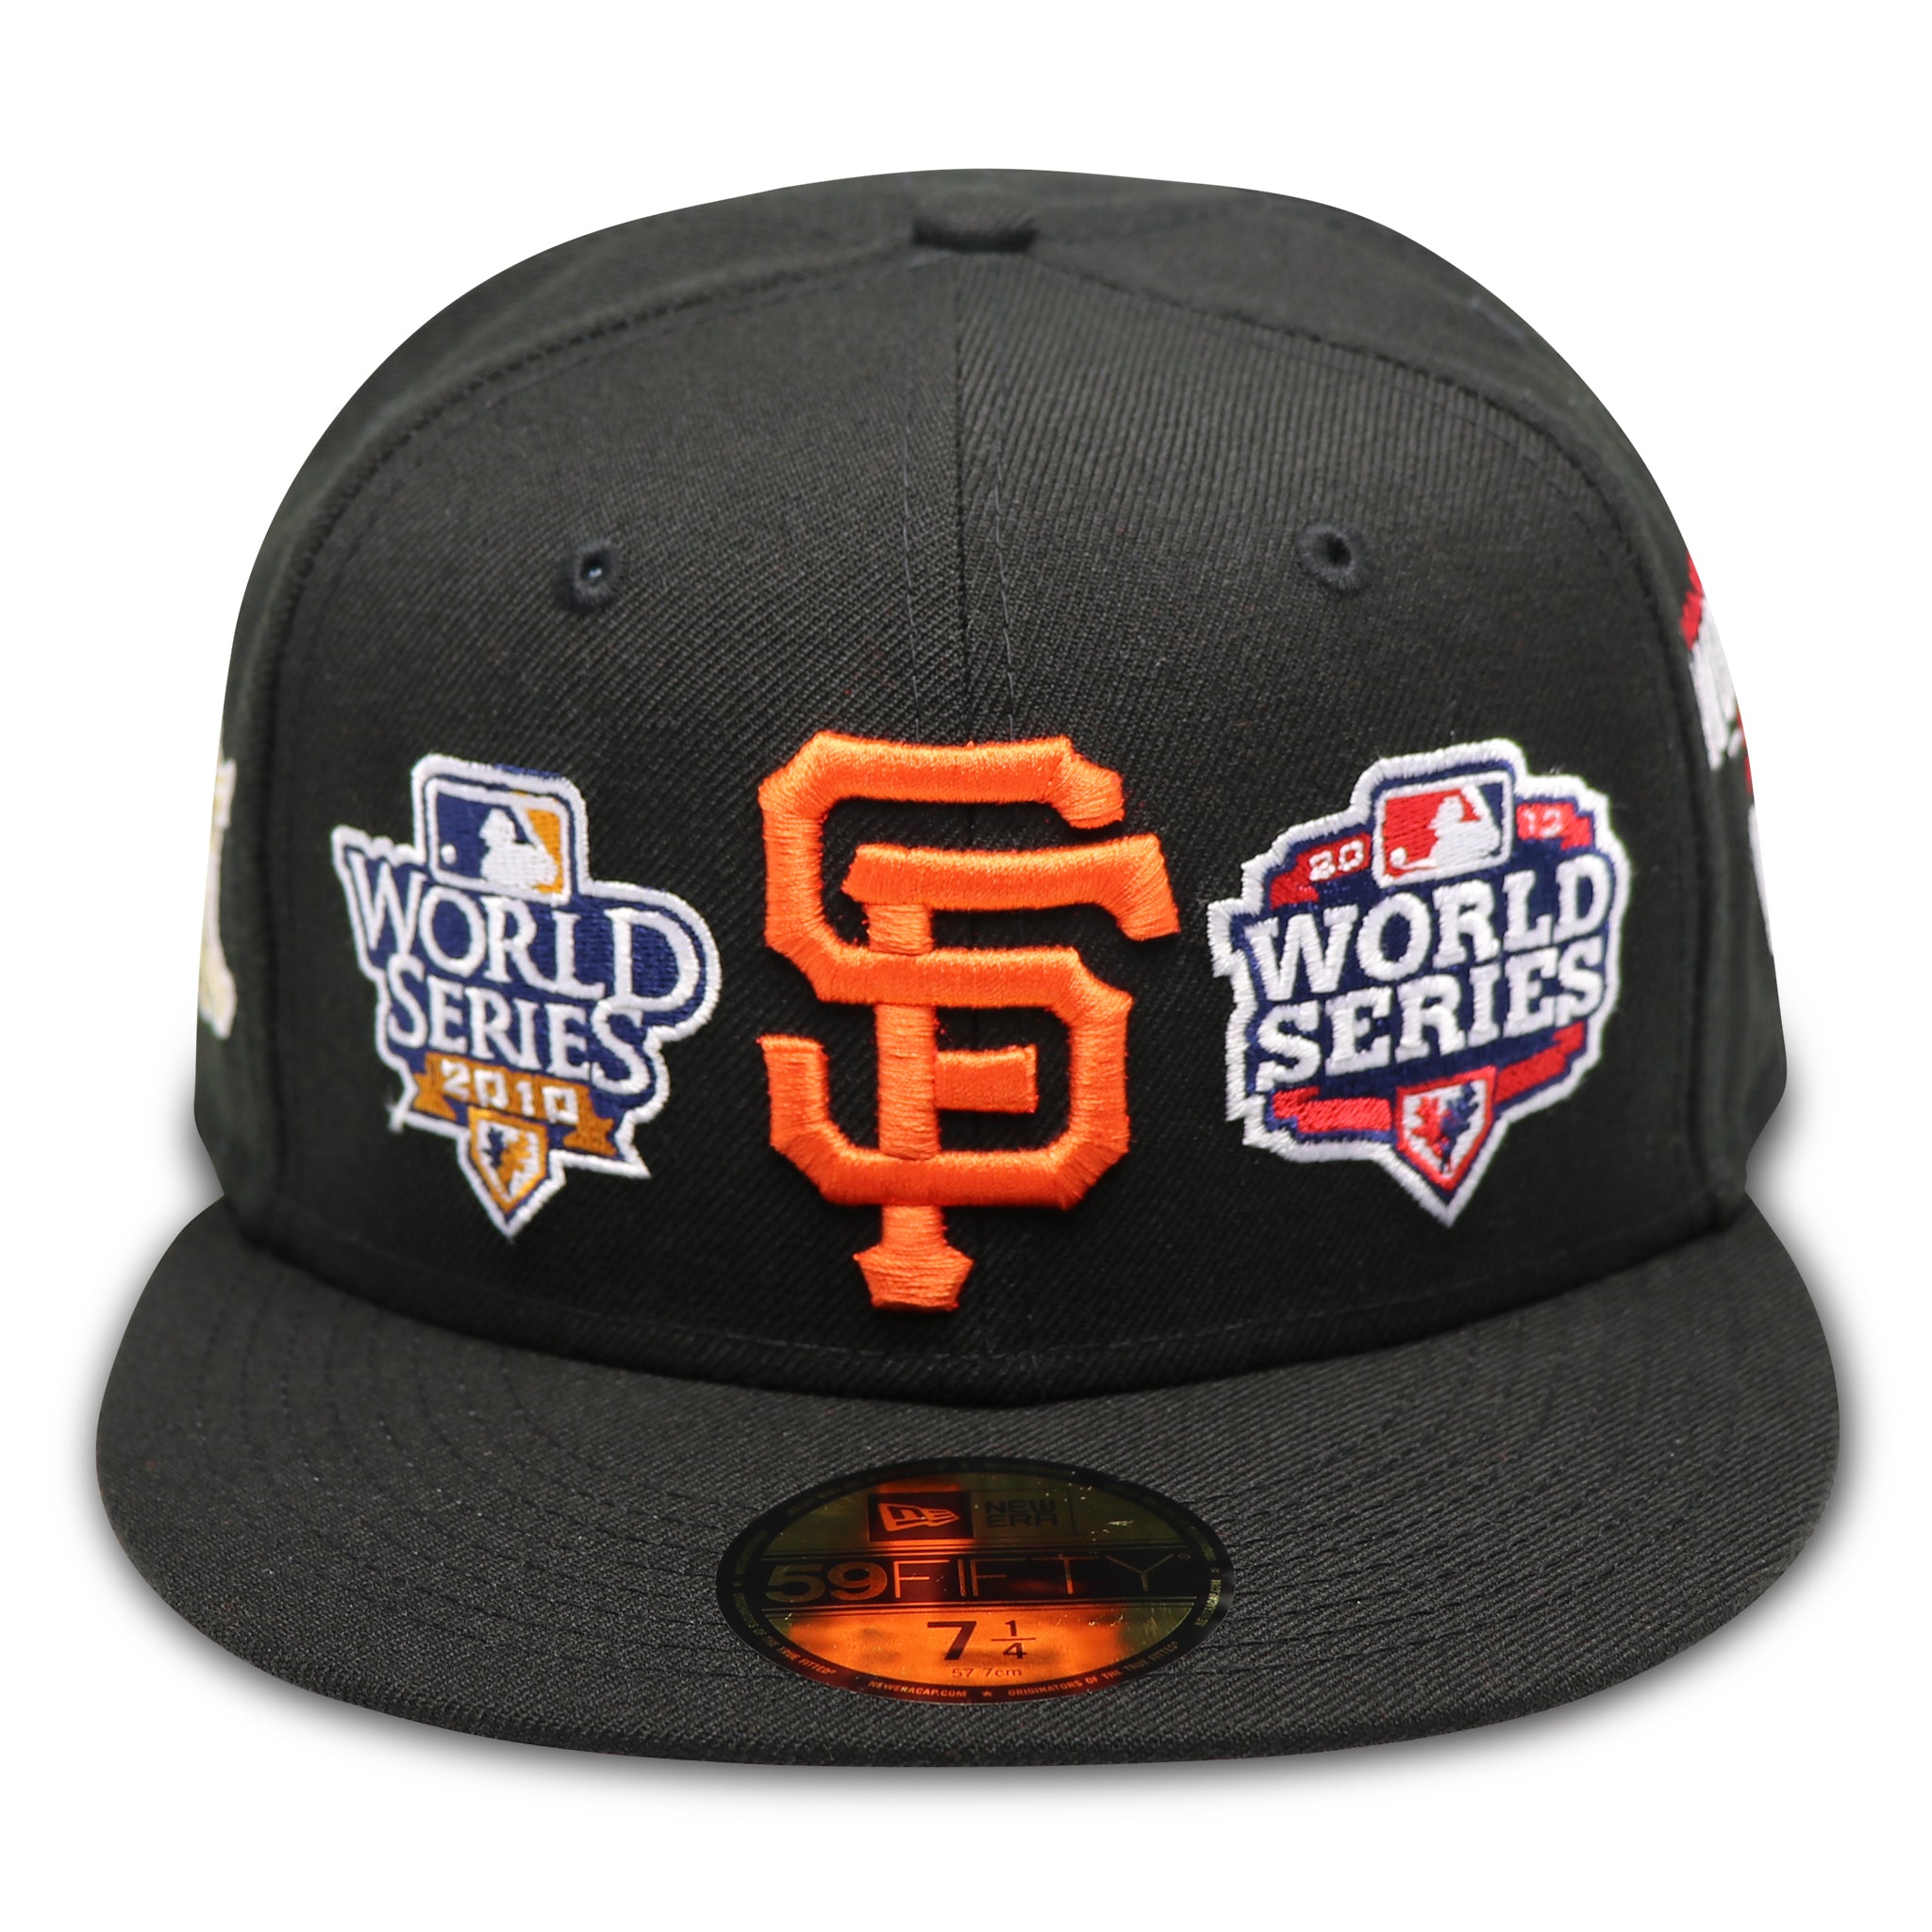 SANFRANCISO GIANTS (8X CHAMPIONS) NEW ERA 59FIFTY FITTED